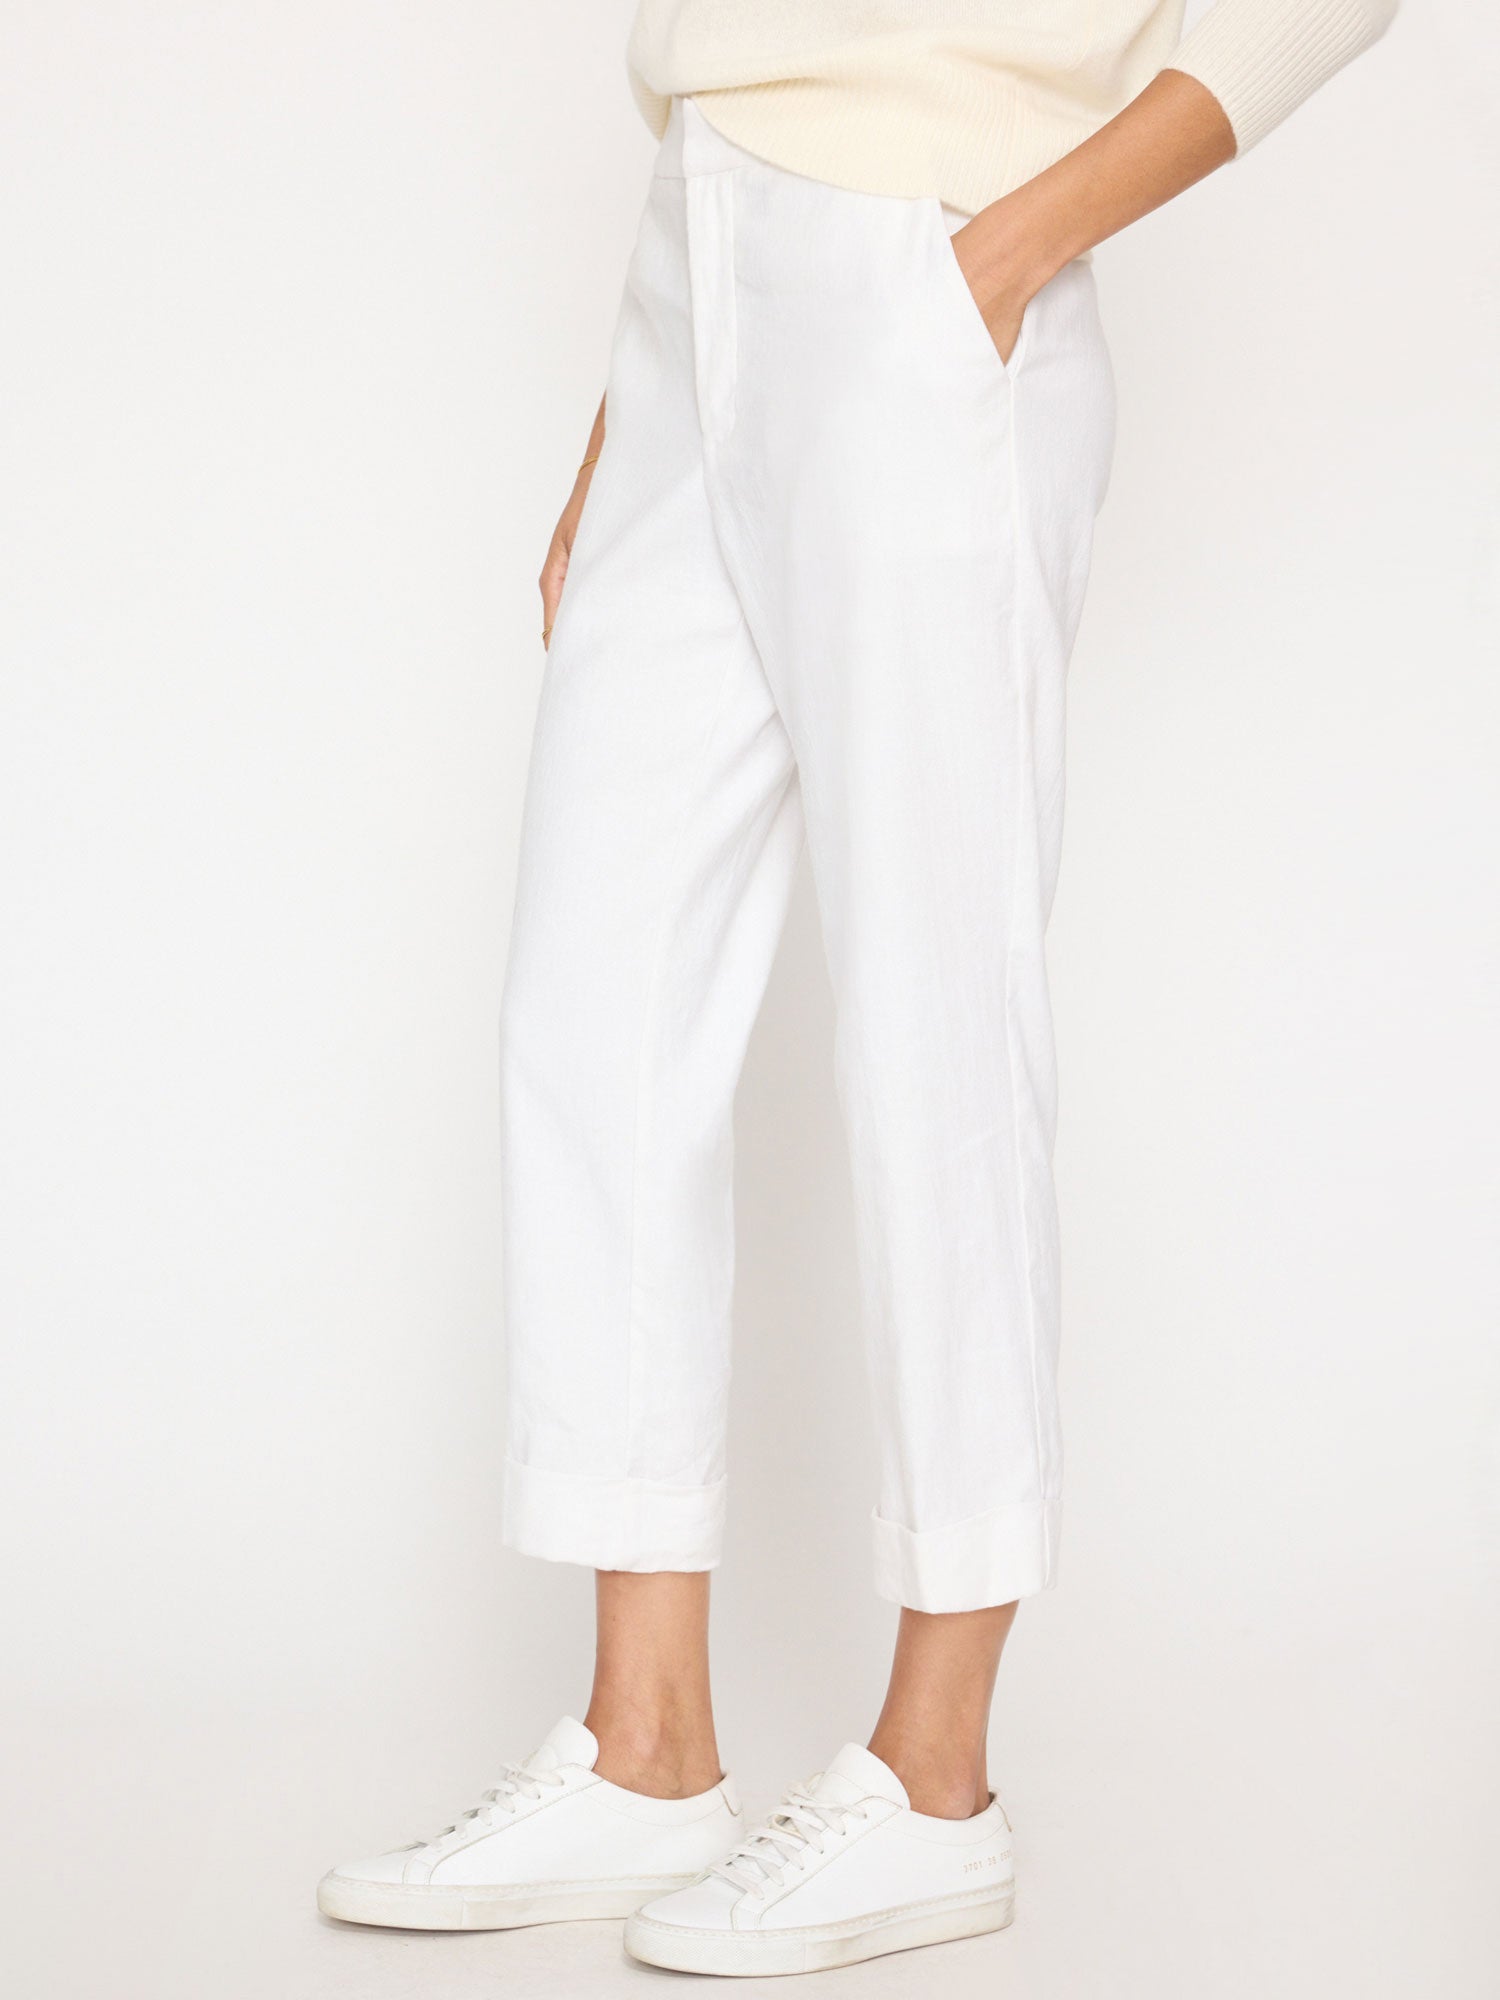 Westport white cropped pant side view